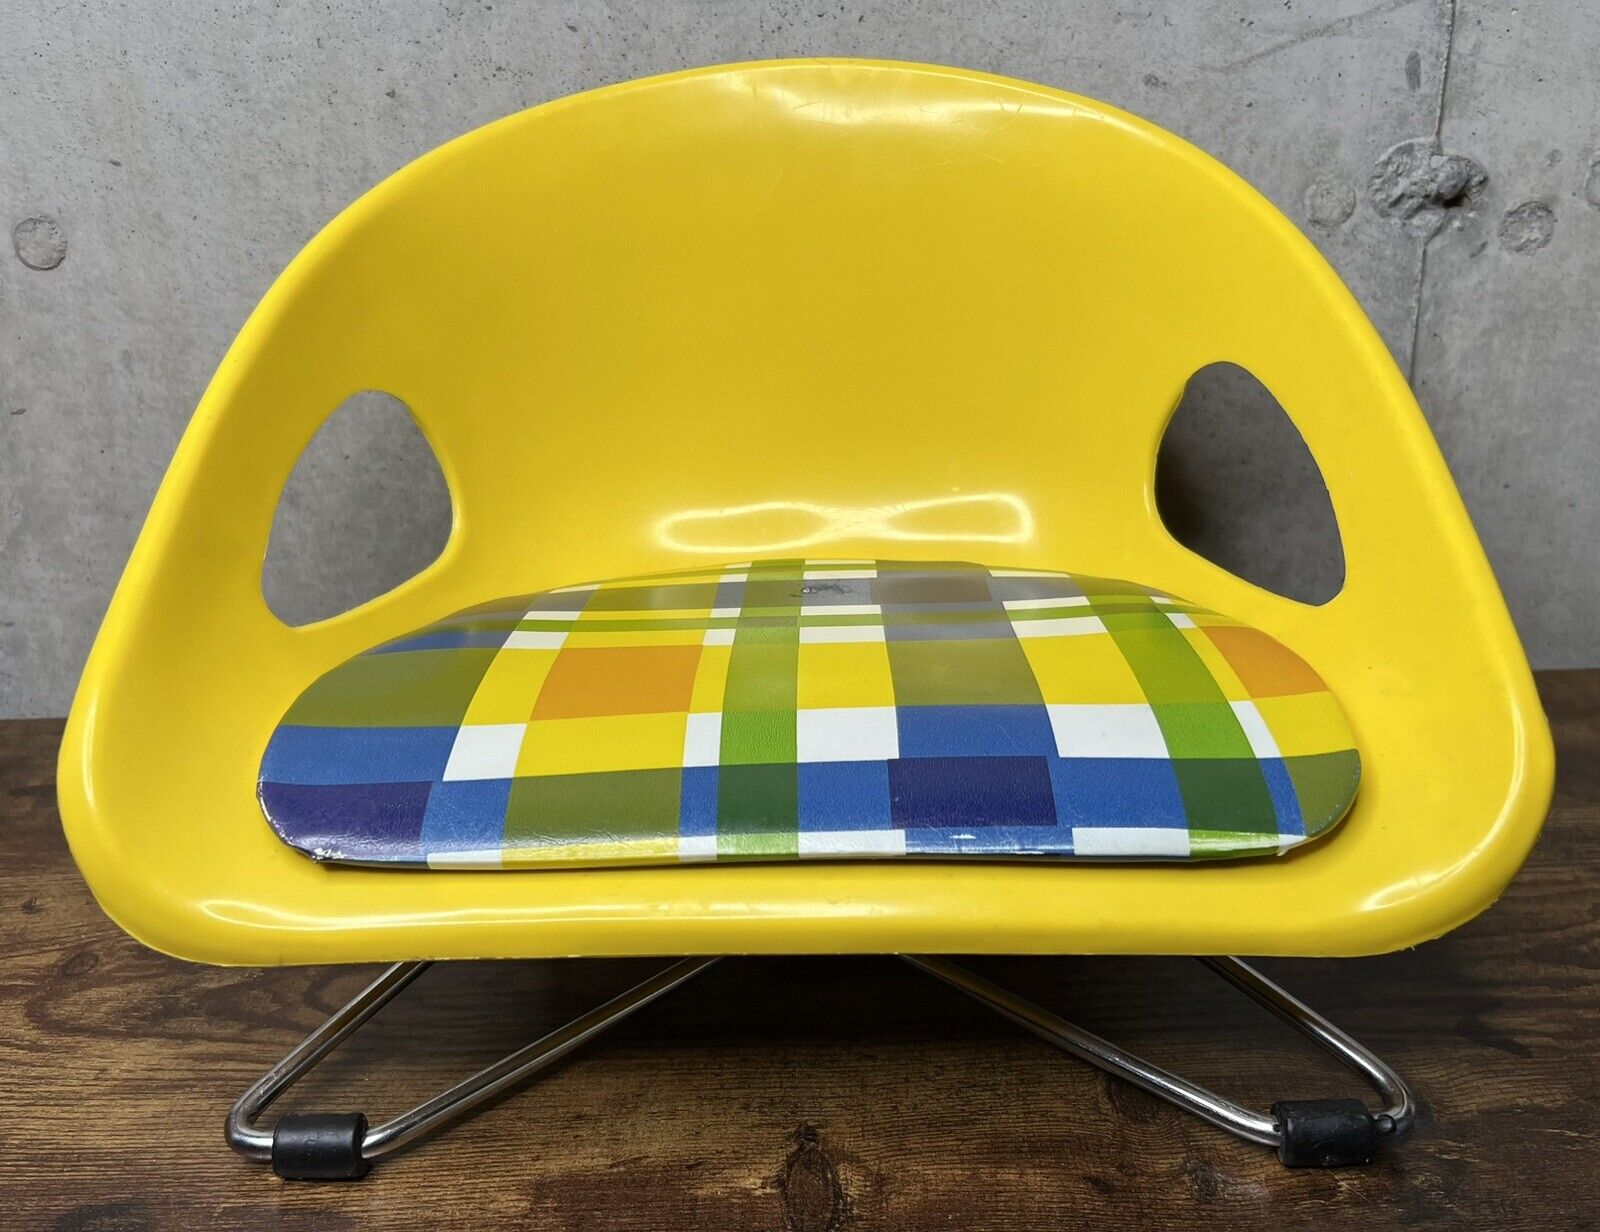 Cosco Child Booster Chair Seat Vintage Mid-Century Modern Kids MCM Atomic Yellow